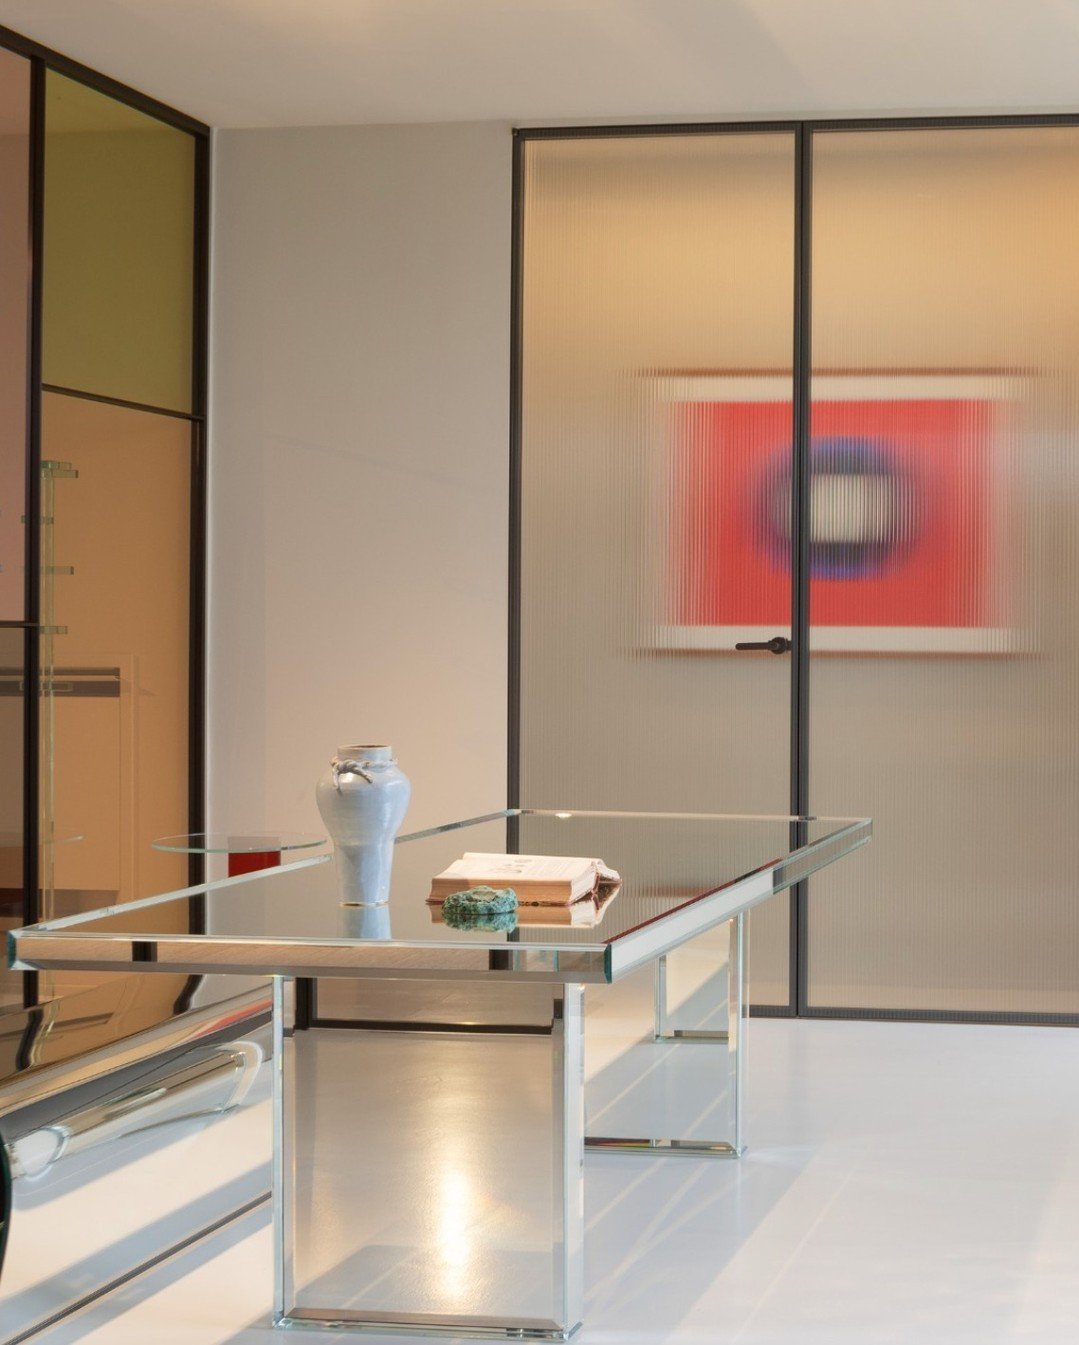 Transform your threshold with the clear, contemporary lines of the Aladdin Double Swing door by @glasitalia, crafted by the visionary Piero Lissoni. A statement in design and functionality, it redefines the division of spaces. 

Naples Fl design, SWF